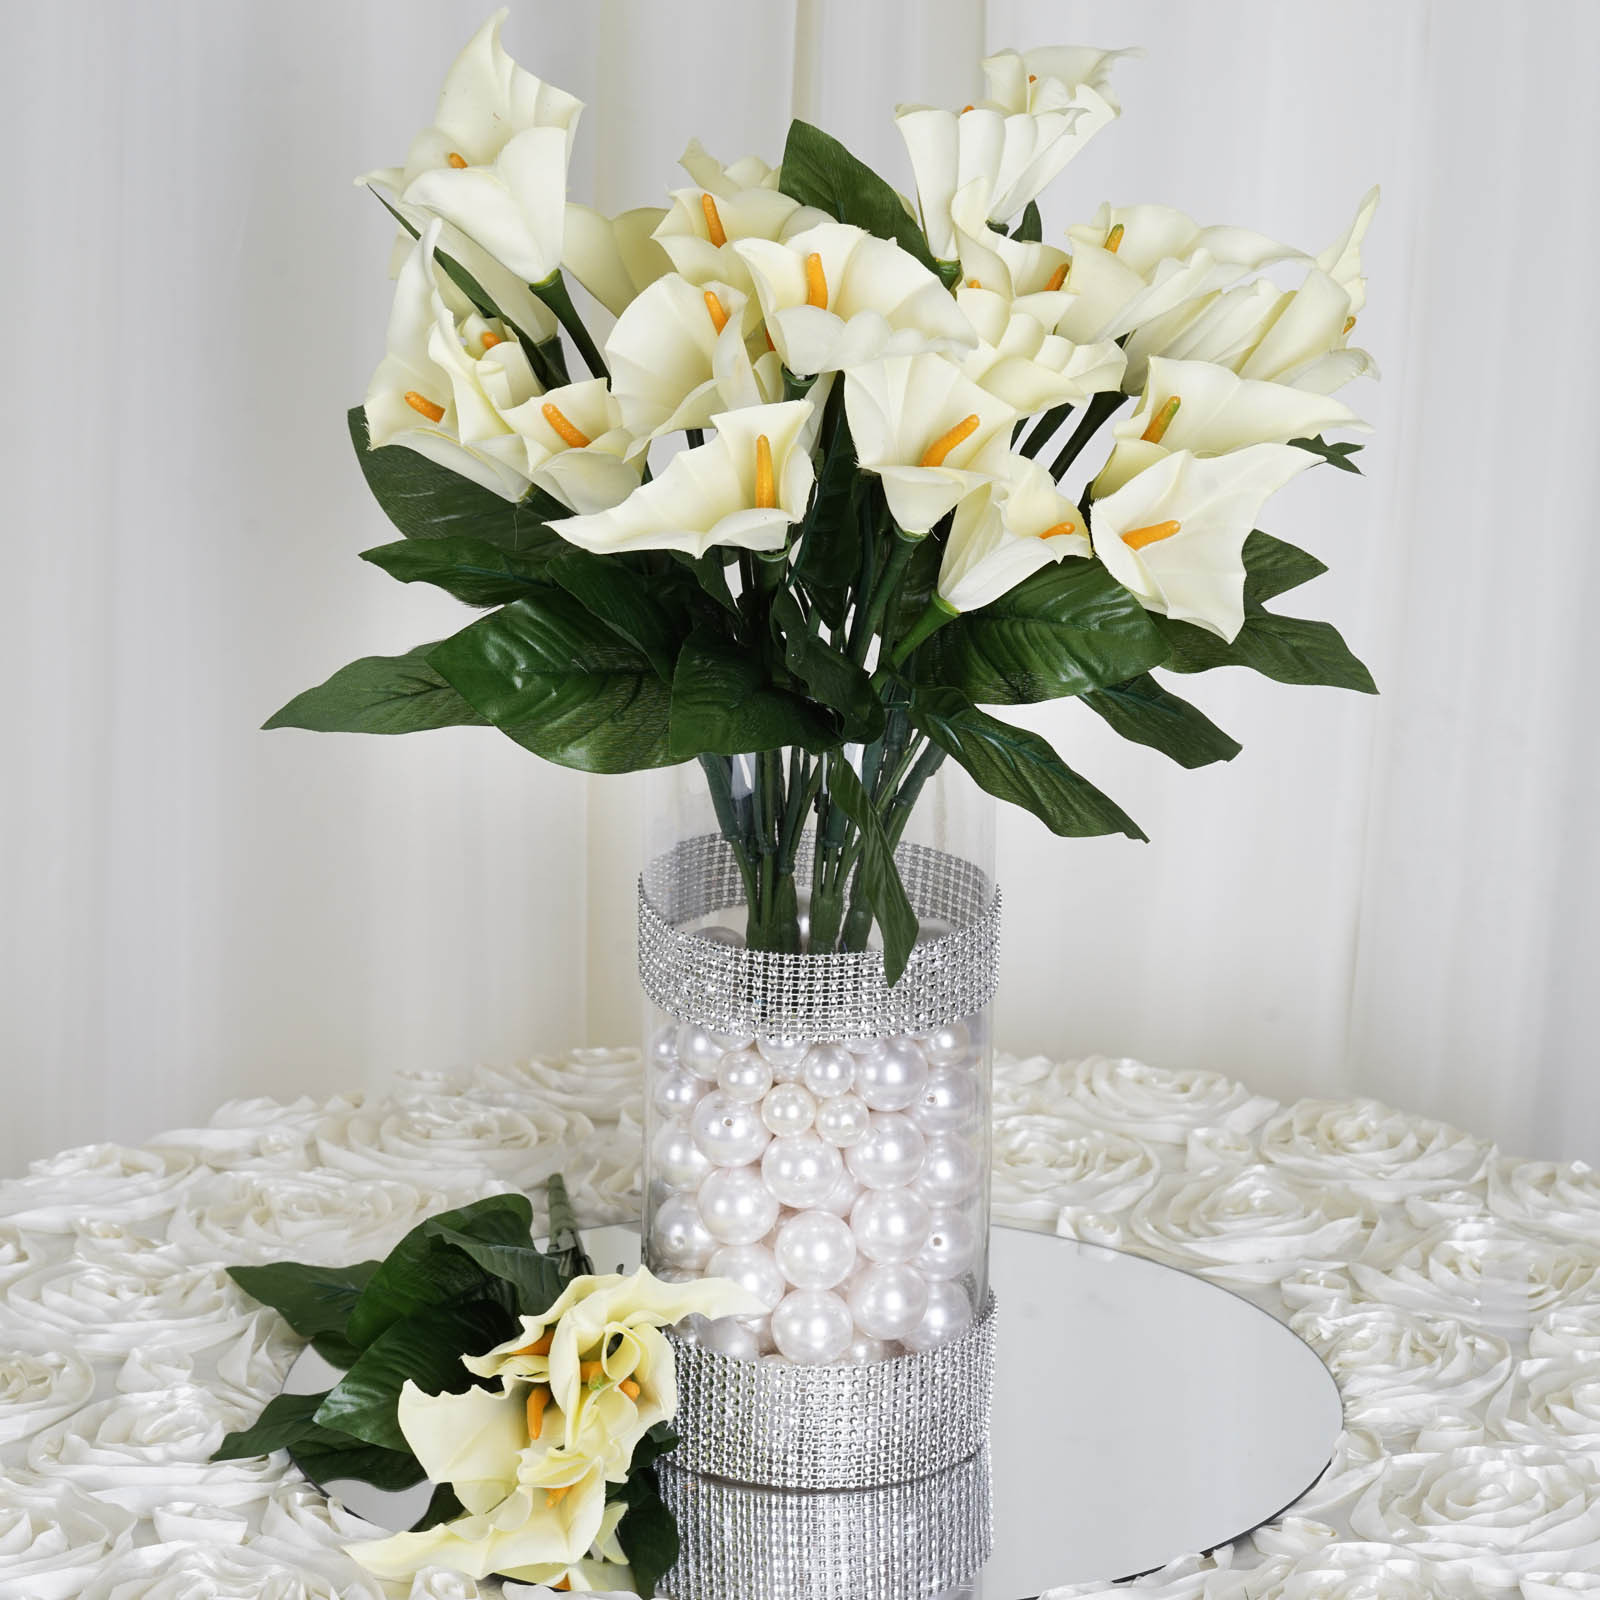 Inexpensive Flowers For Wedding
 84 Silk Calla Lily Flowers for Wedding Bouquets